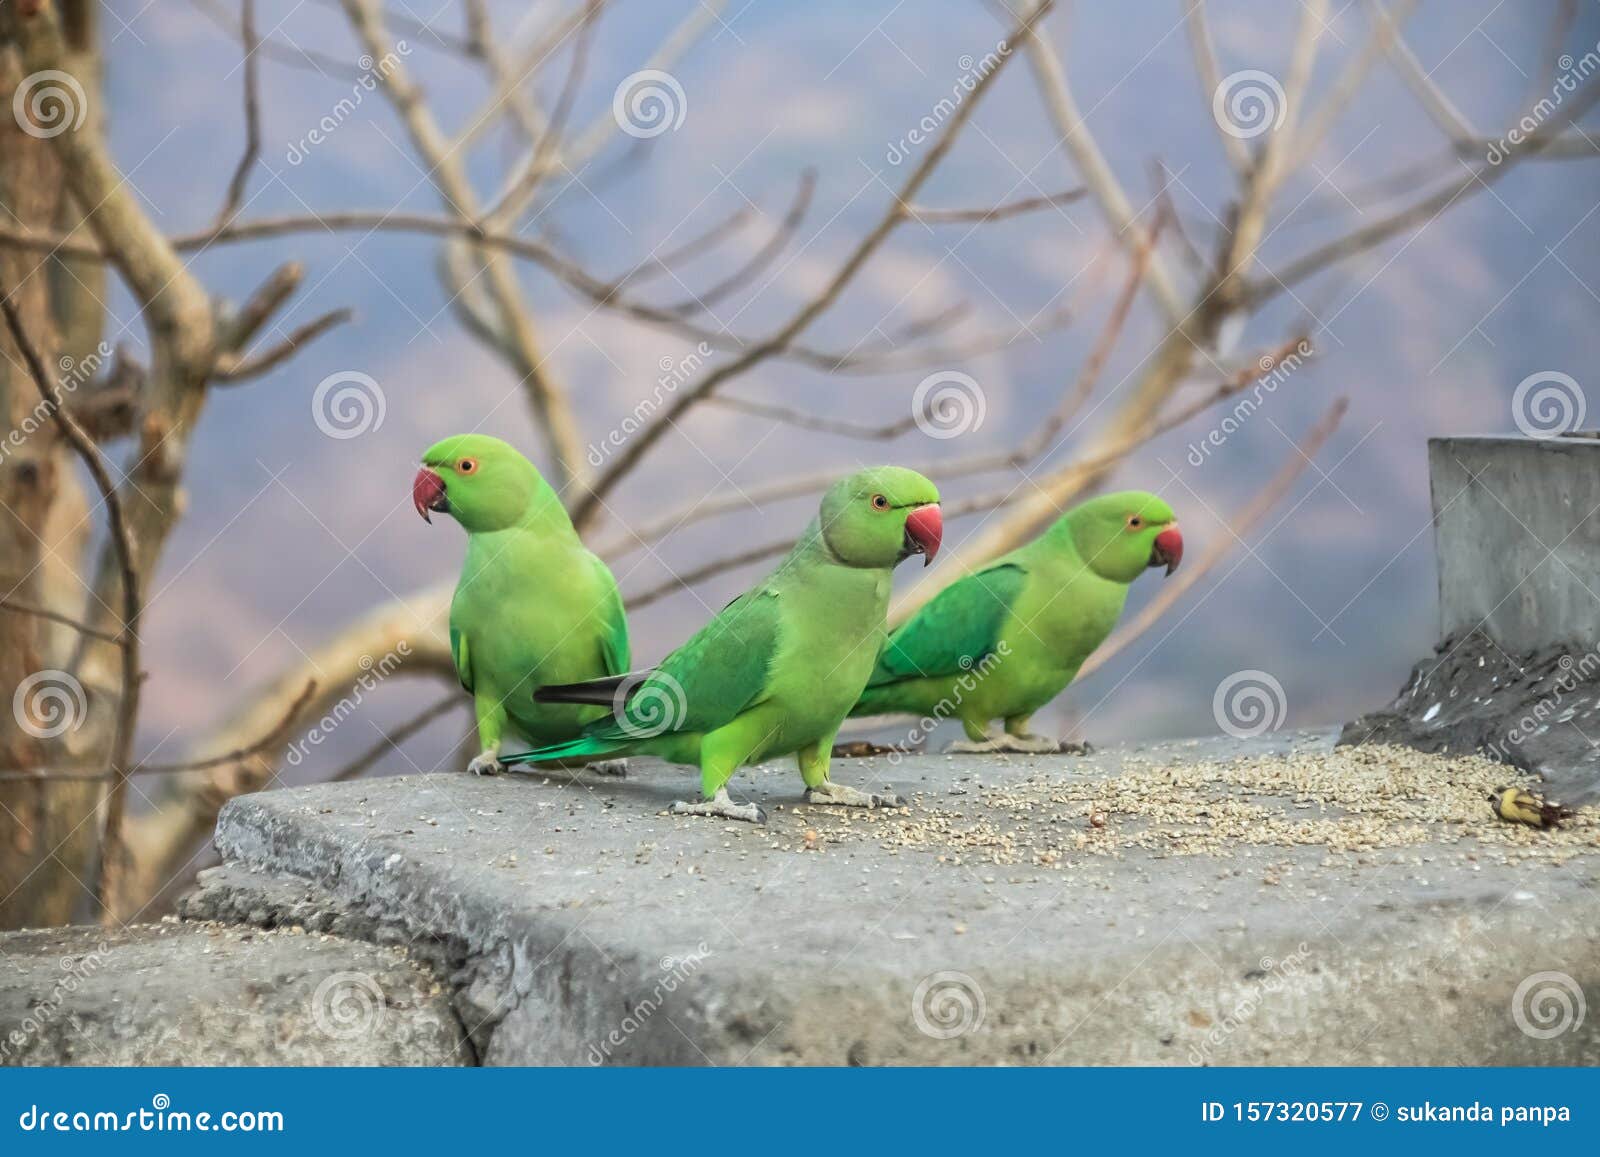 Wall stickers stone wall 8504 parrot